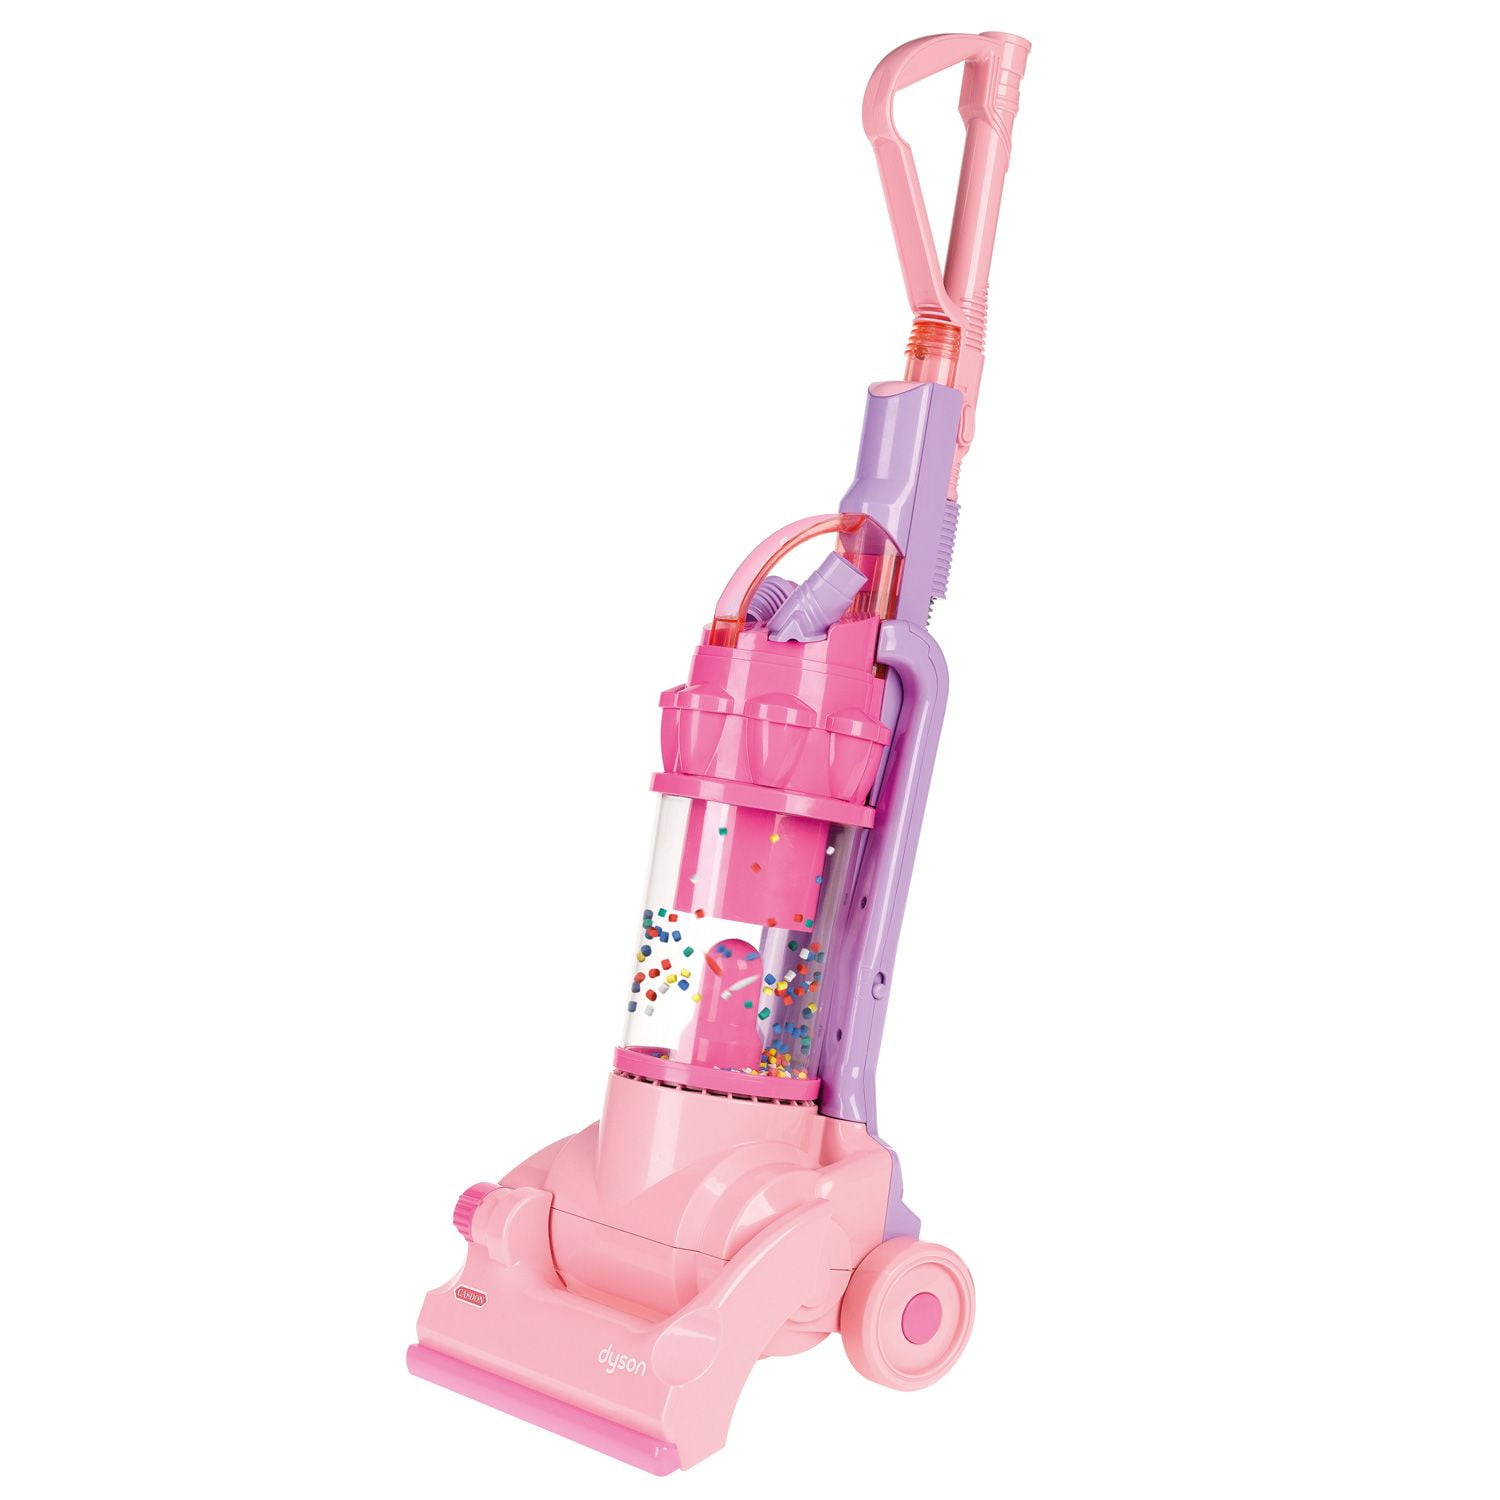 childrens toy hoover